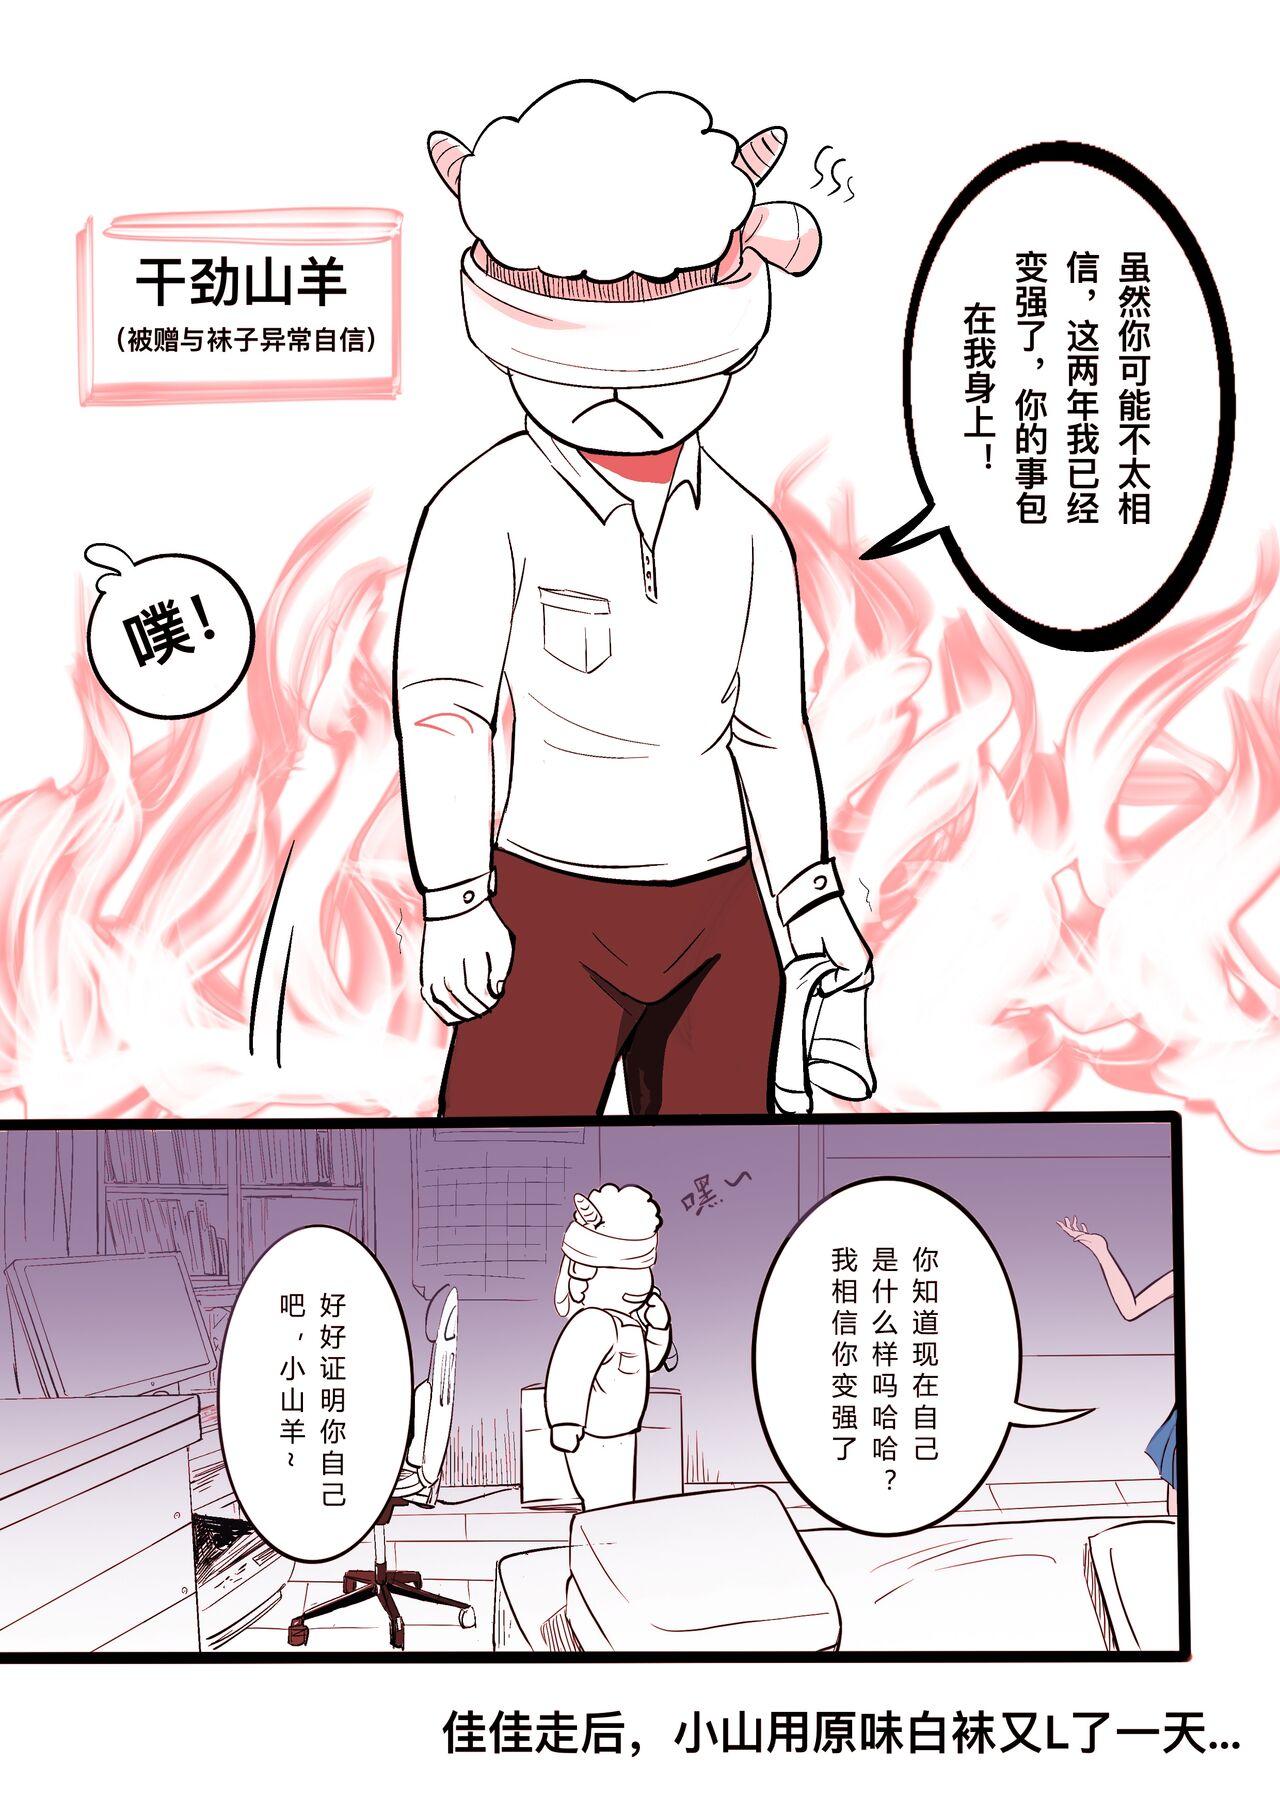 GOAT-goat Ⅰ special chapter 13